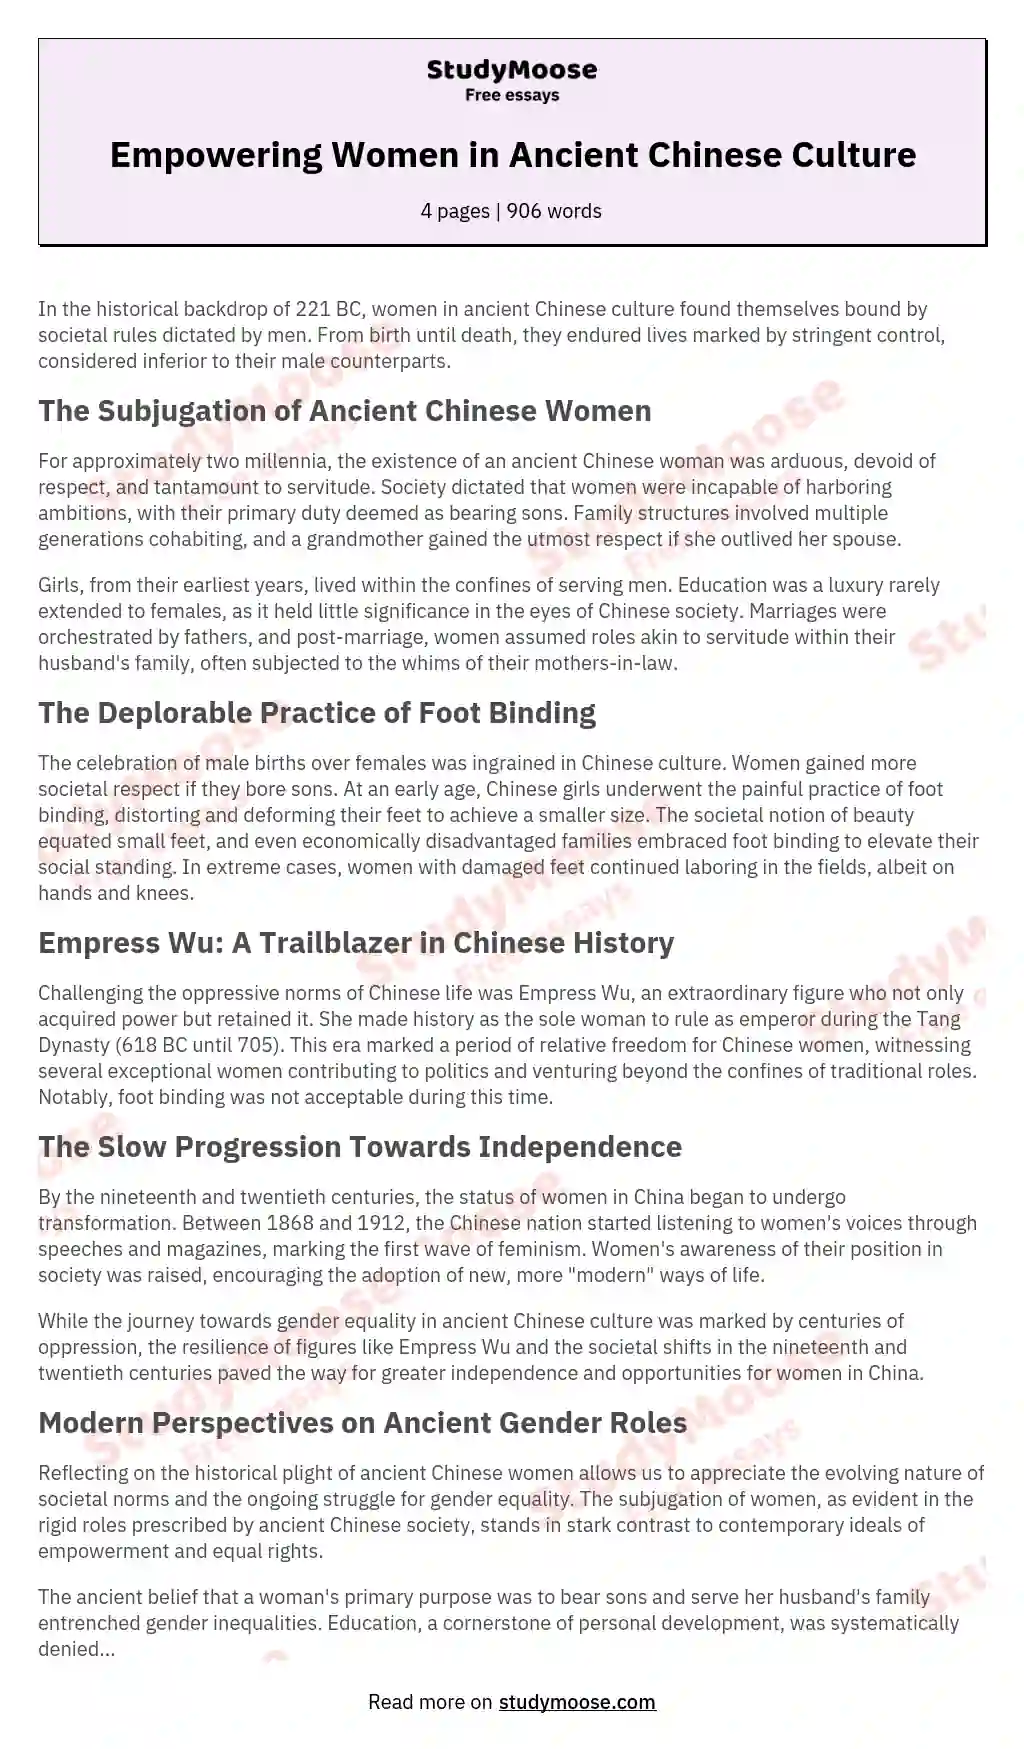 Empowering Women in Ancient Chinese Culture essay